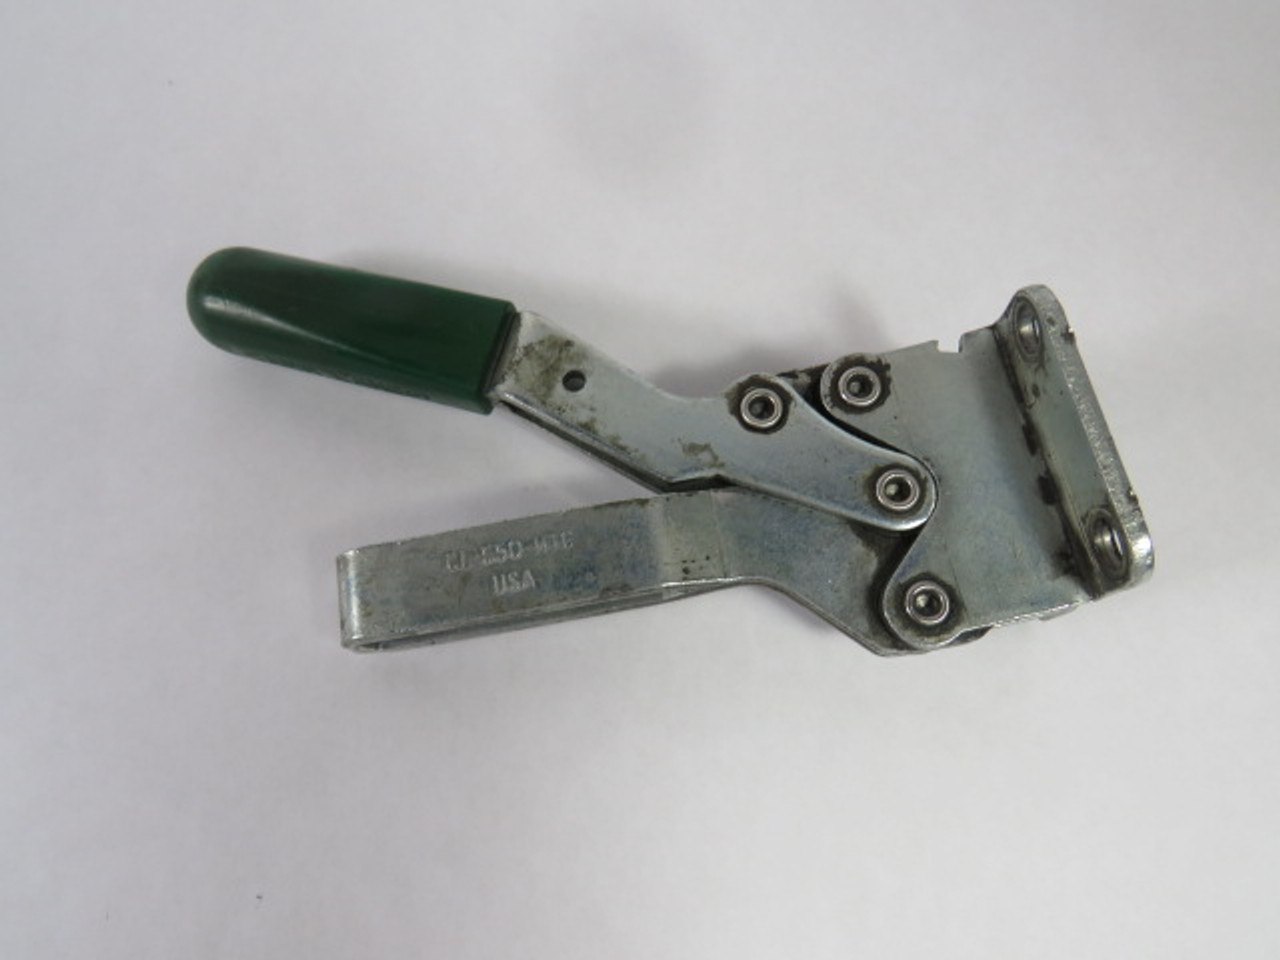 Carrlane CL-550-HTC Toggle Clamp 750LBS. Holding Capacity USED